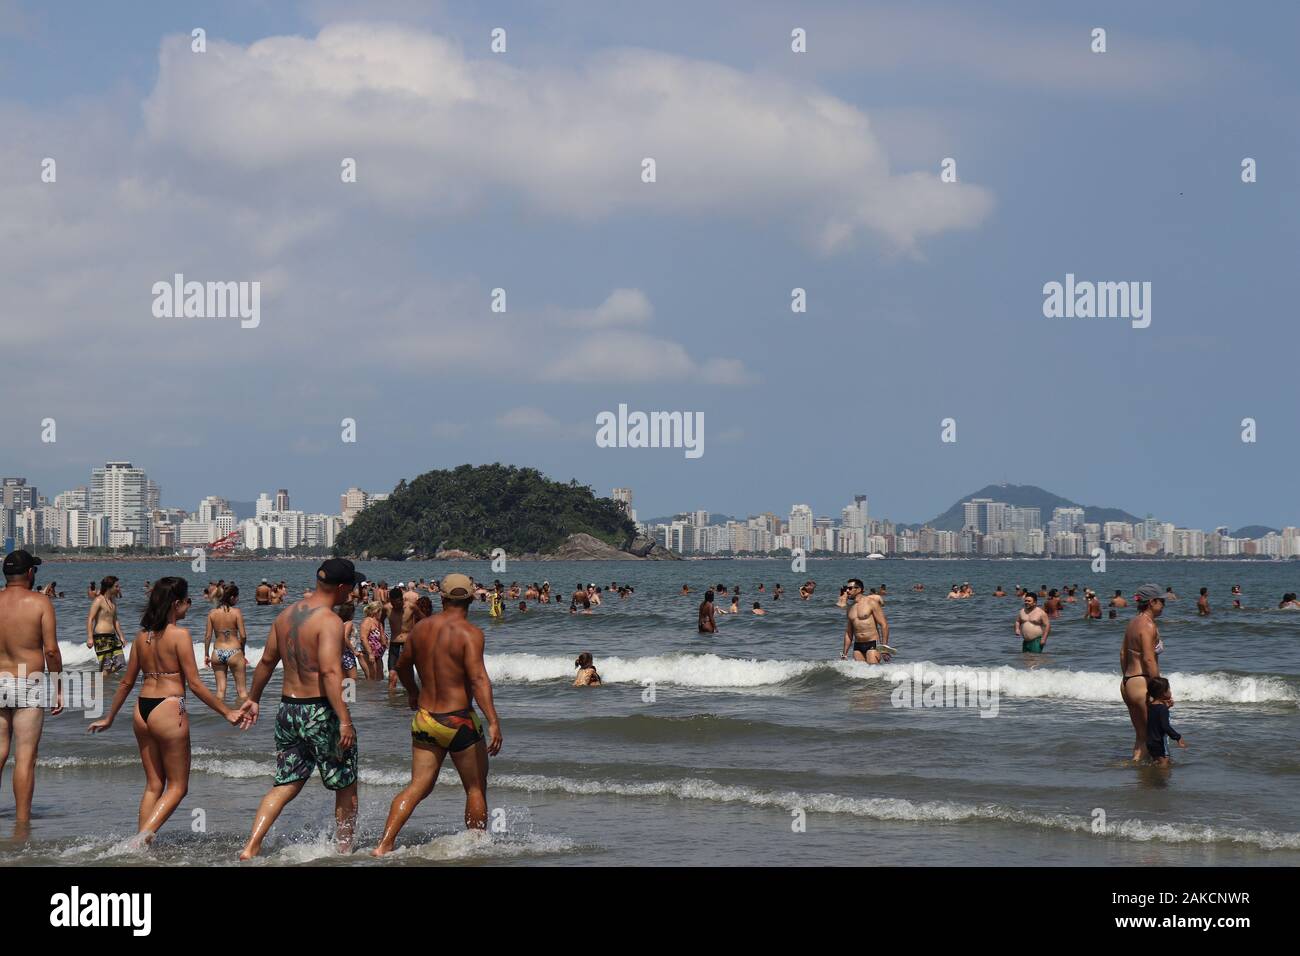 Brazilians celebrated the first day of the year with a sea bath at Itararé beach. Stock Photo